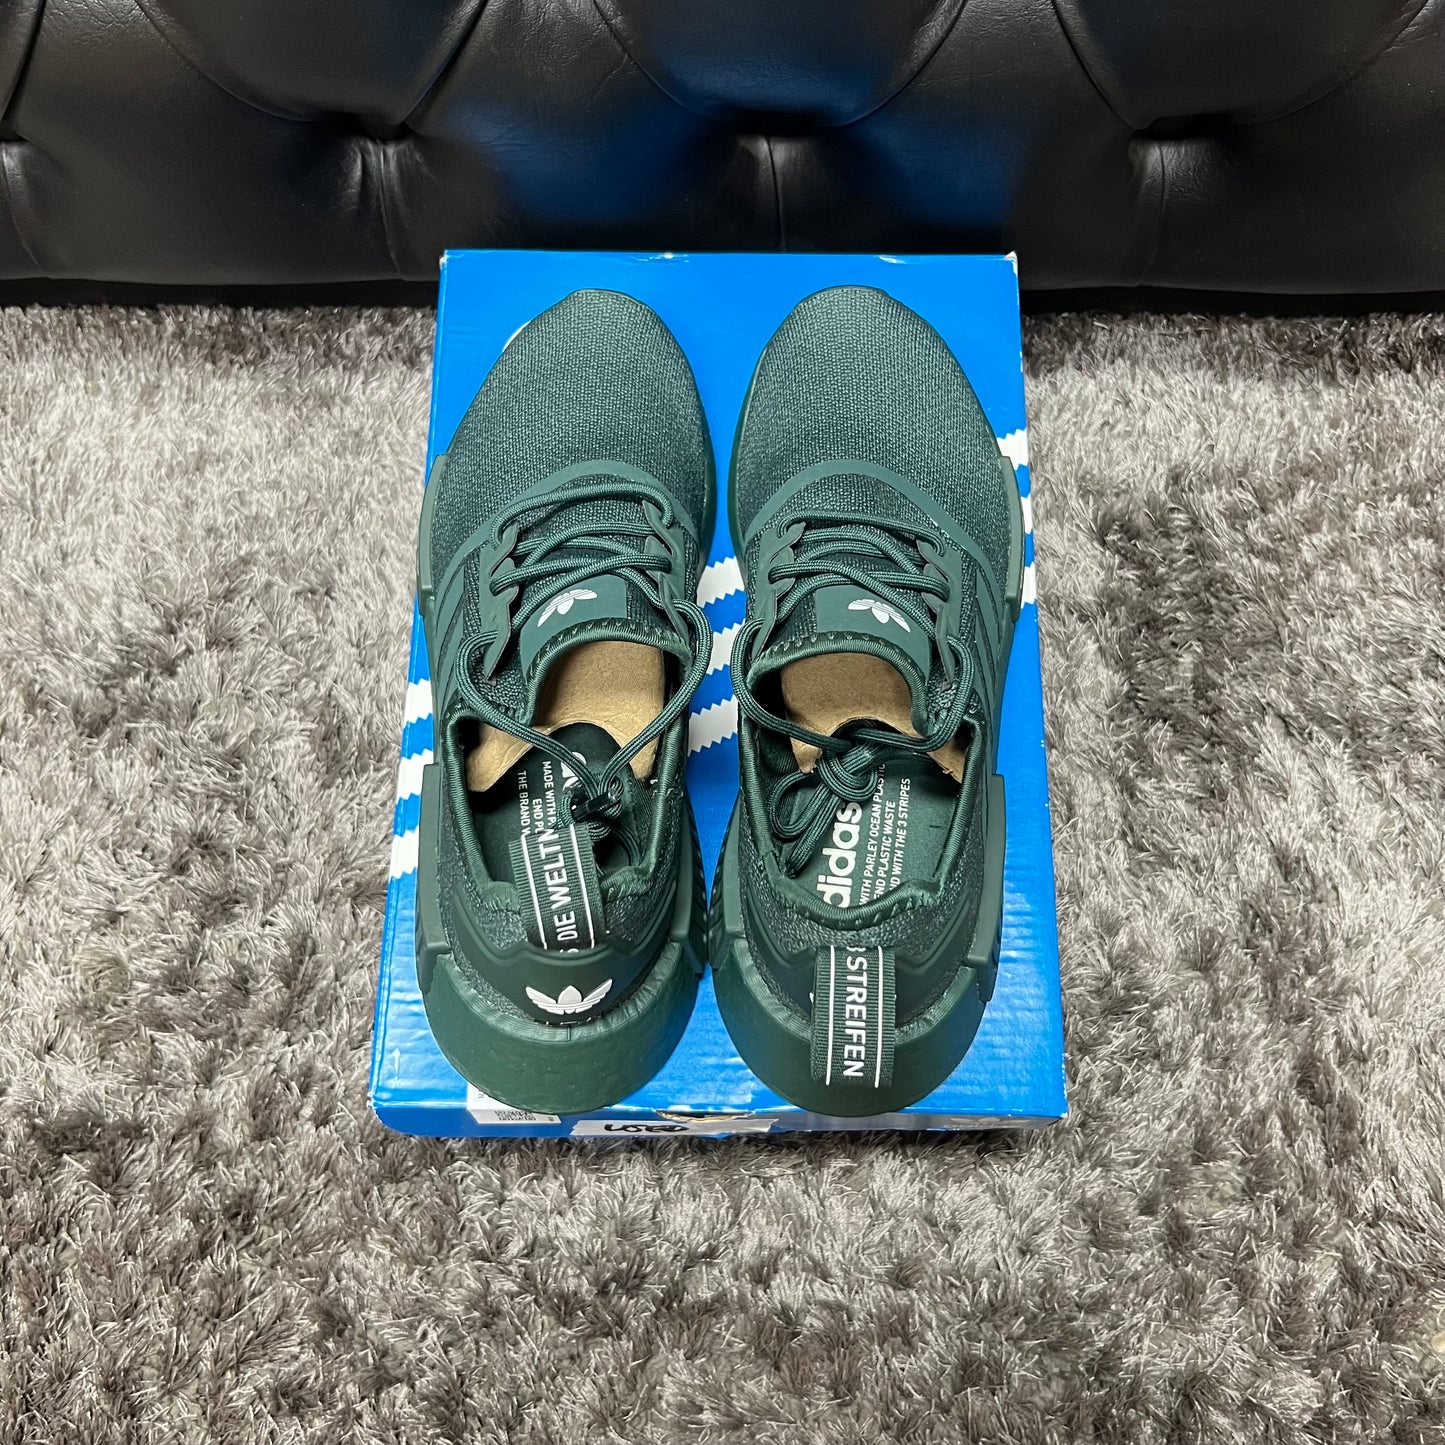 Adidas NMD R1 Mineral Green size 7.5 used